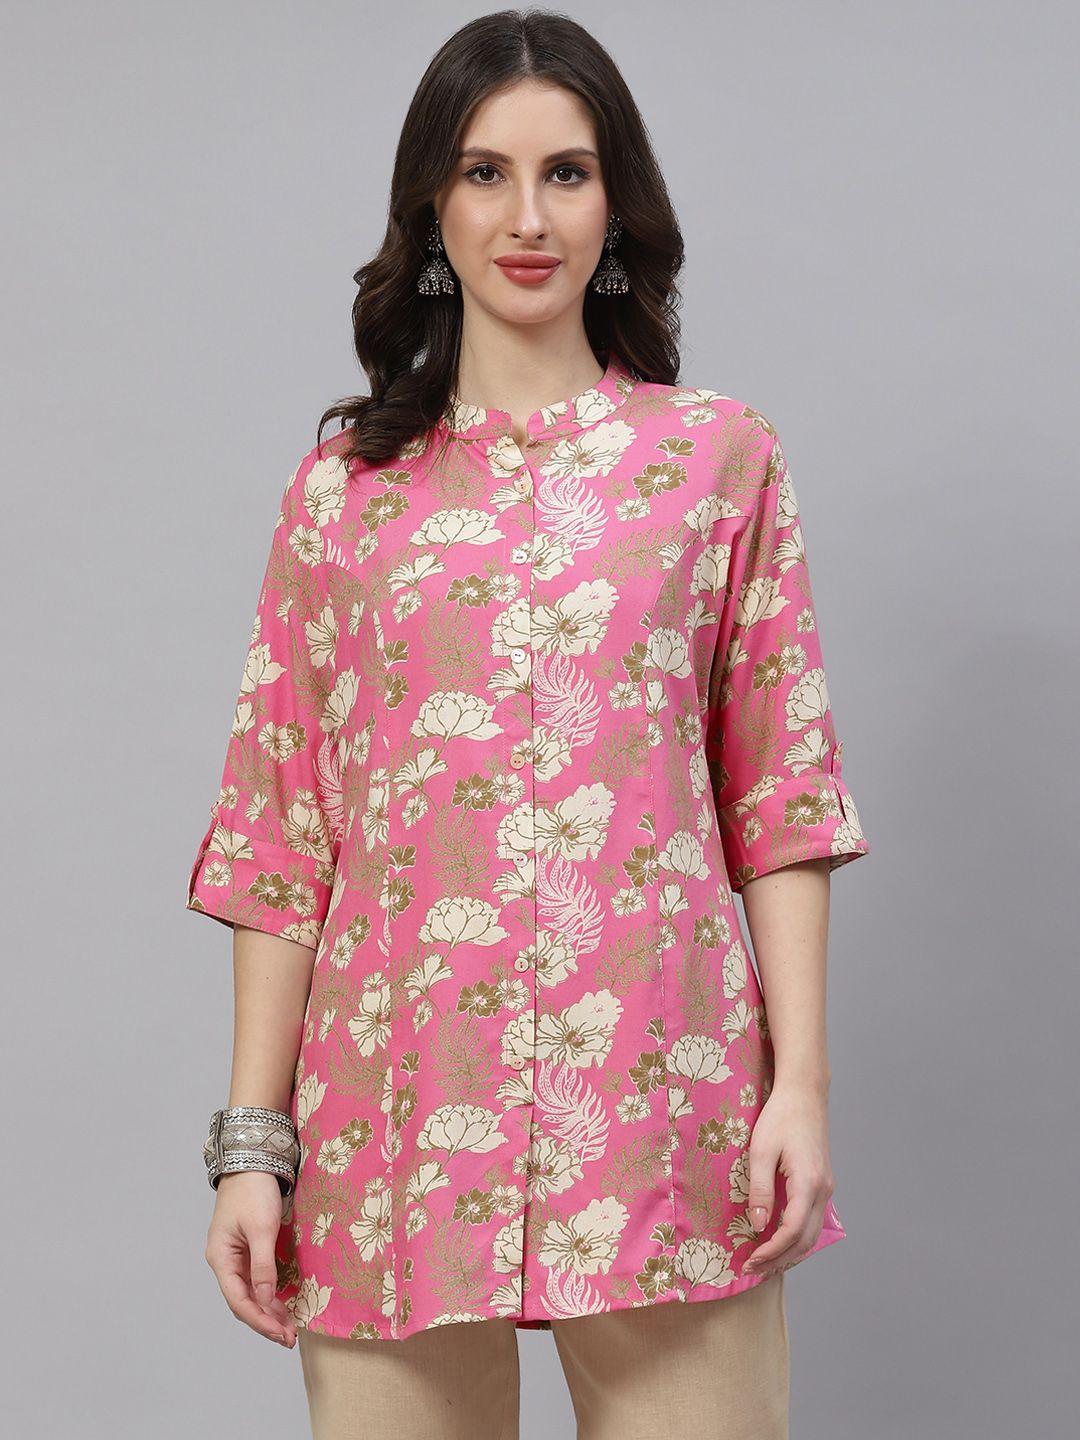 divena pink & beige floral print roll-up sleeves shirt style top